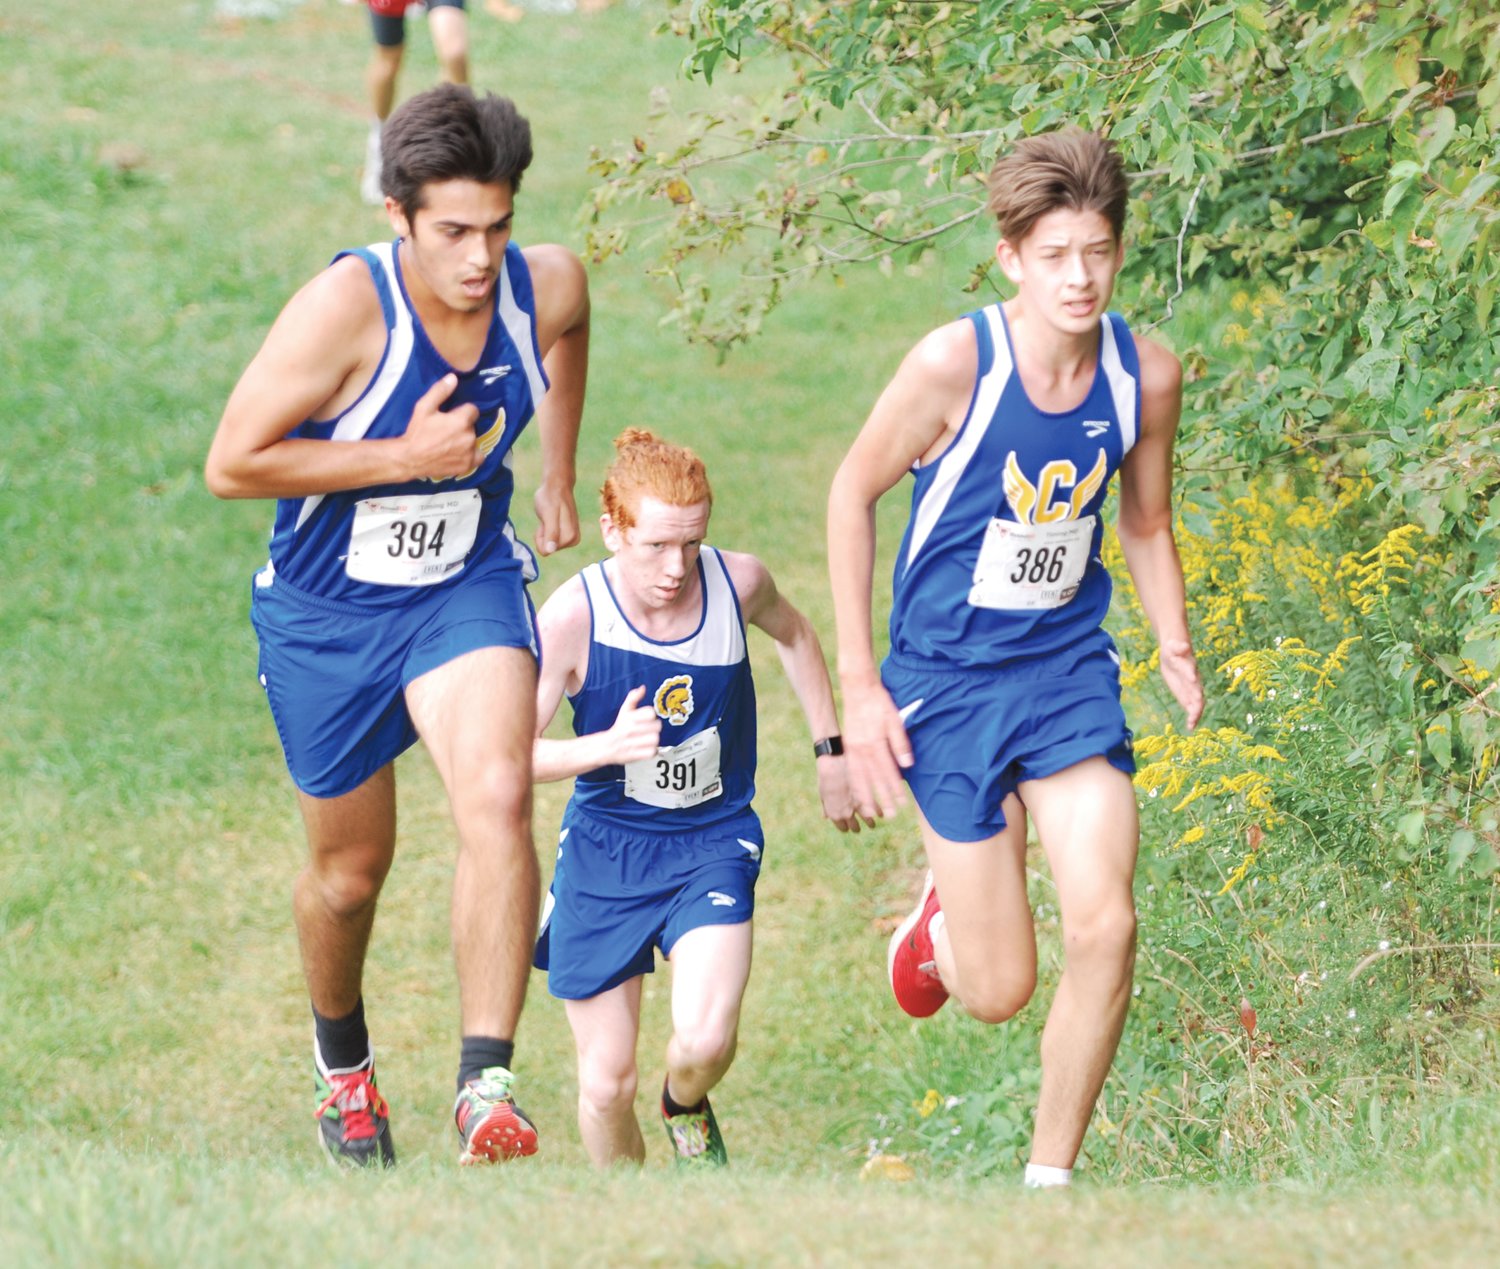 Crawfordsville's Arthur Ruano, Peter Kearns, and Roman Contreras climb the hill at Southmont during the Montgomery County meet on Thursday.